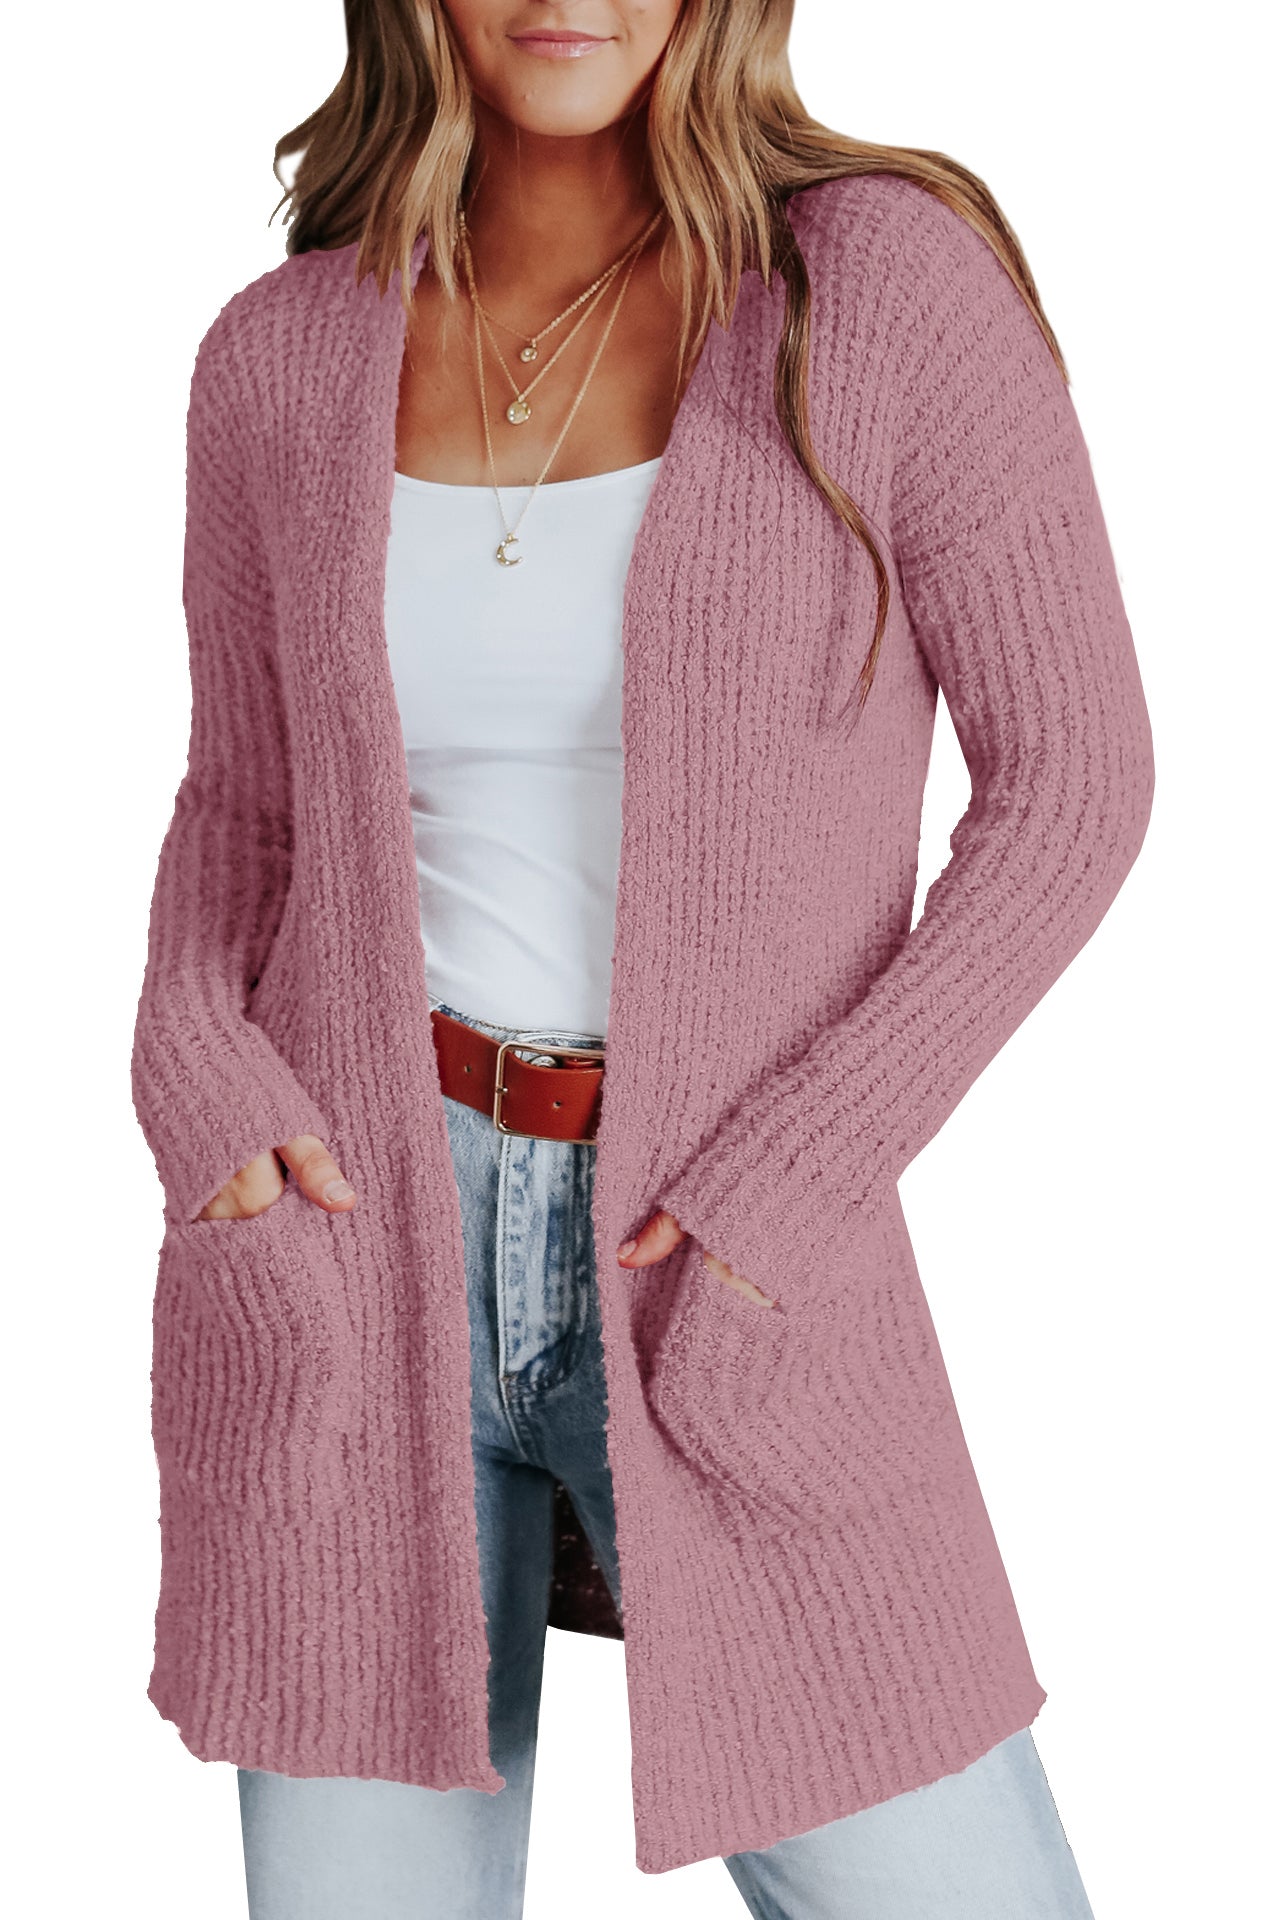 Women's Long Sleeve Cardigan Knit Jacket with Pockets